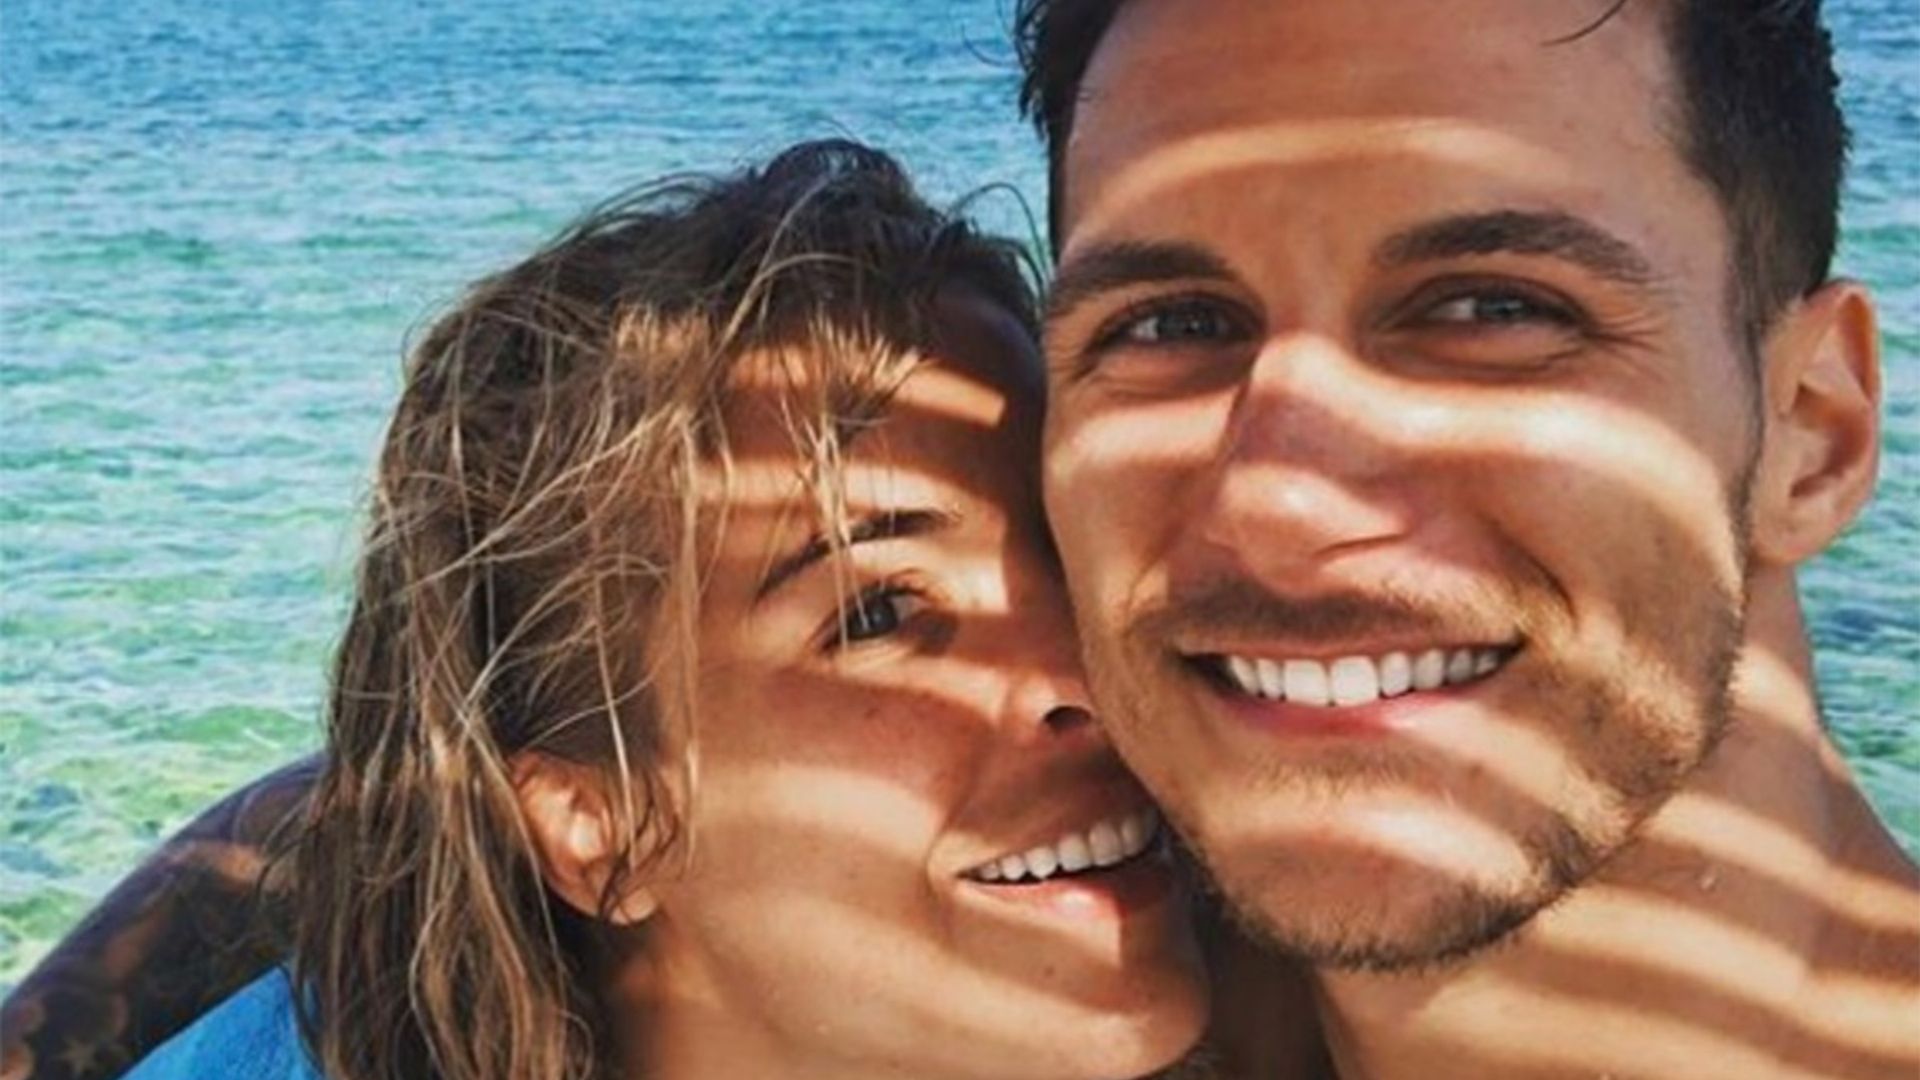 Gemma Atkinson shares the sweetest lockdown message for Strictly's Gorka Marquez!